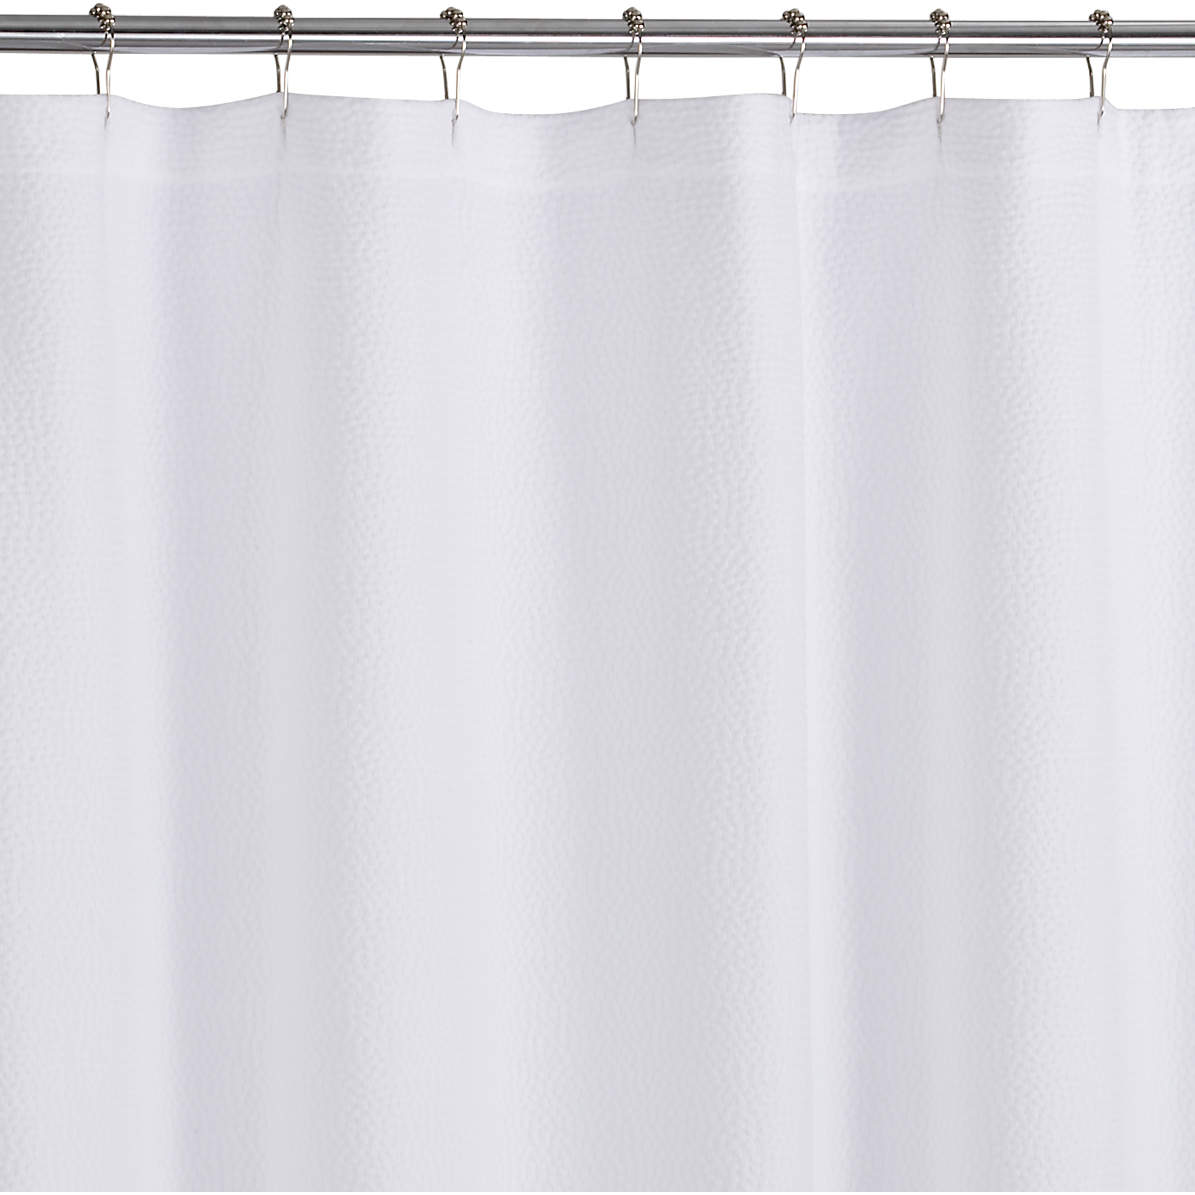 Pebble Matelasse White Shower Curtain, Crate And Barrel Shower Curtains White